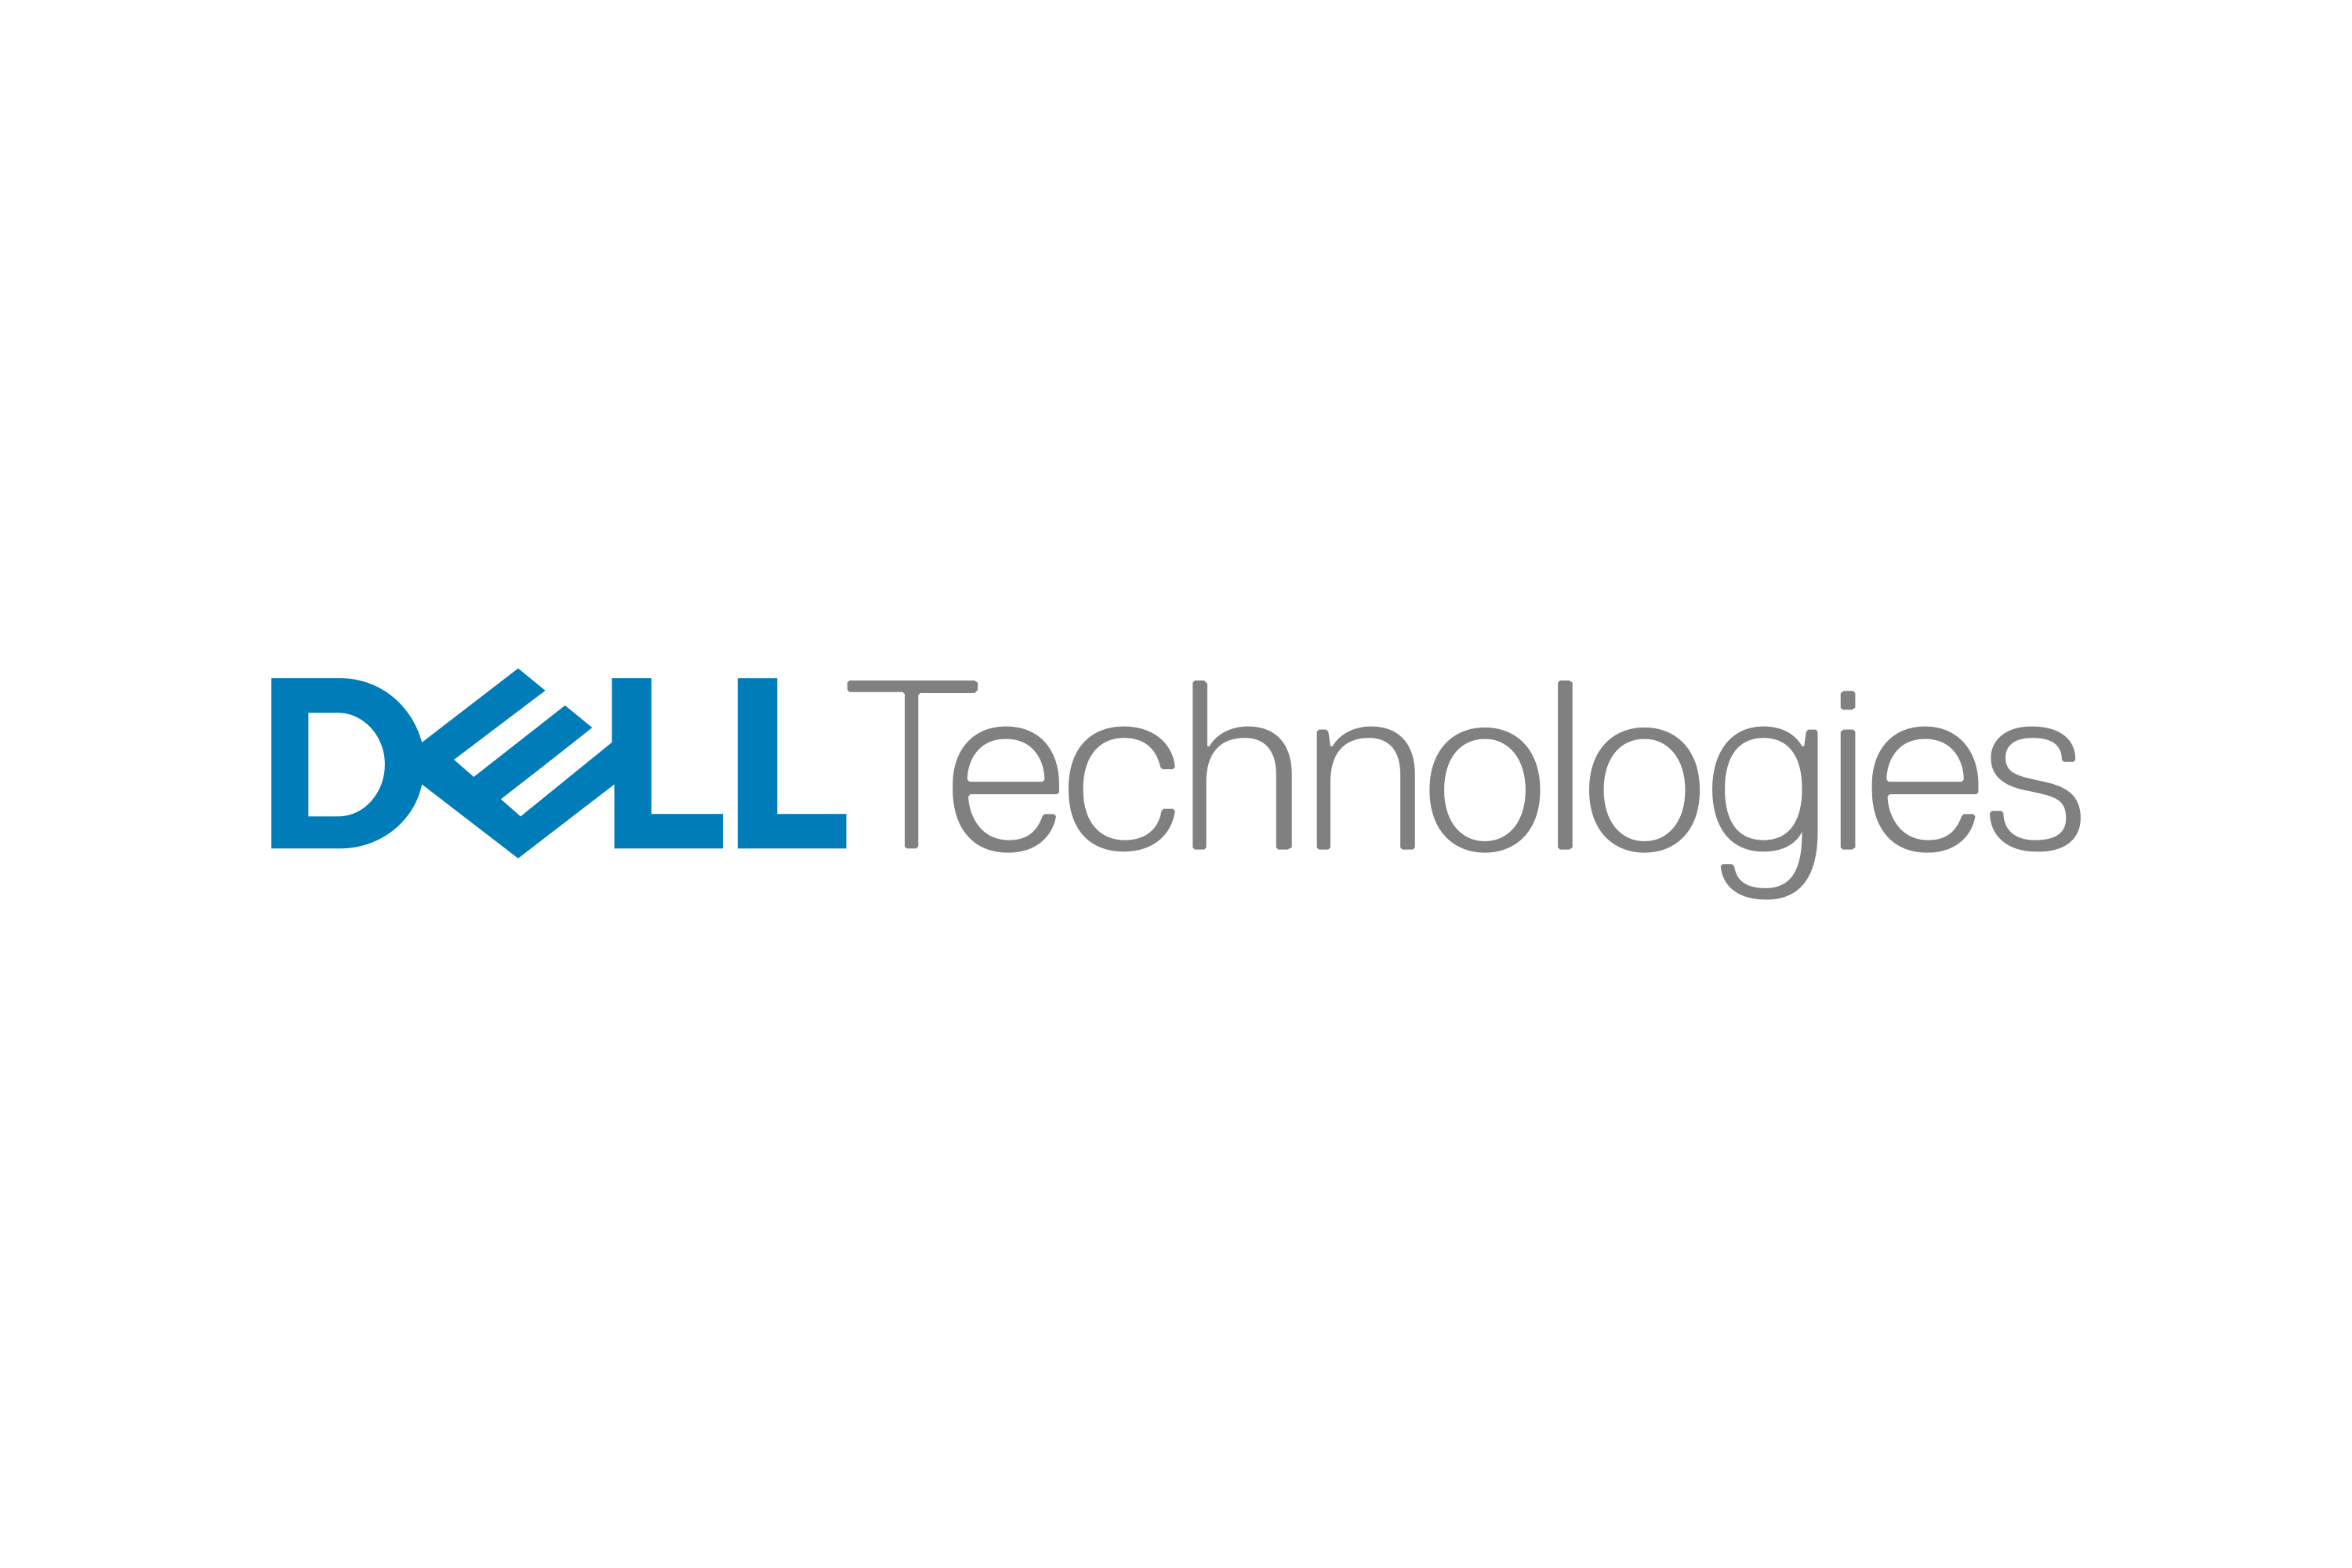 dell logo png